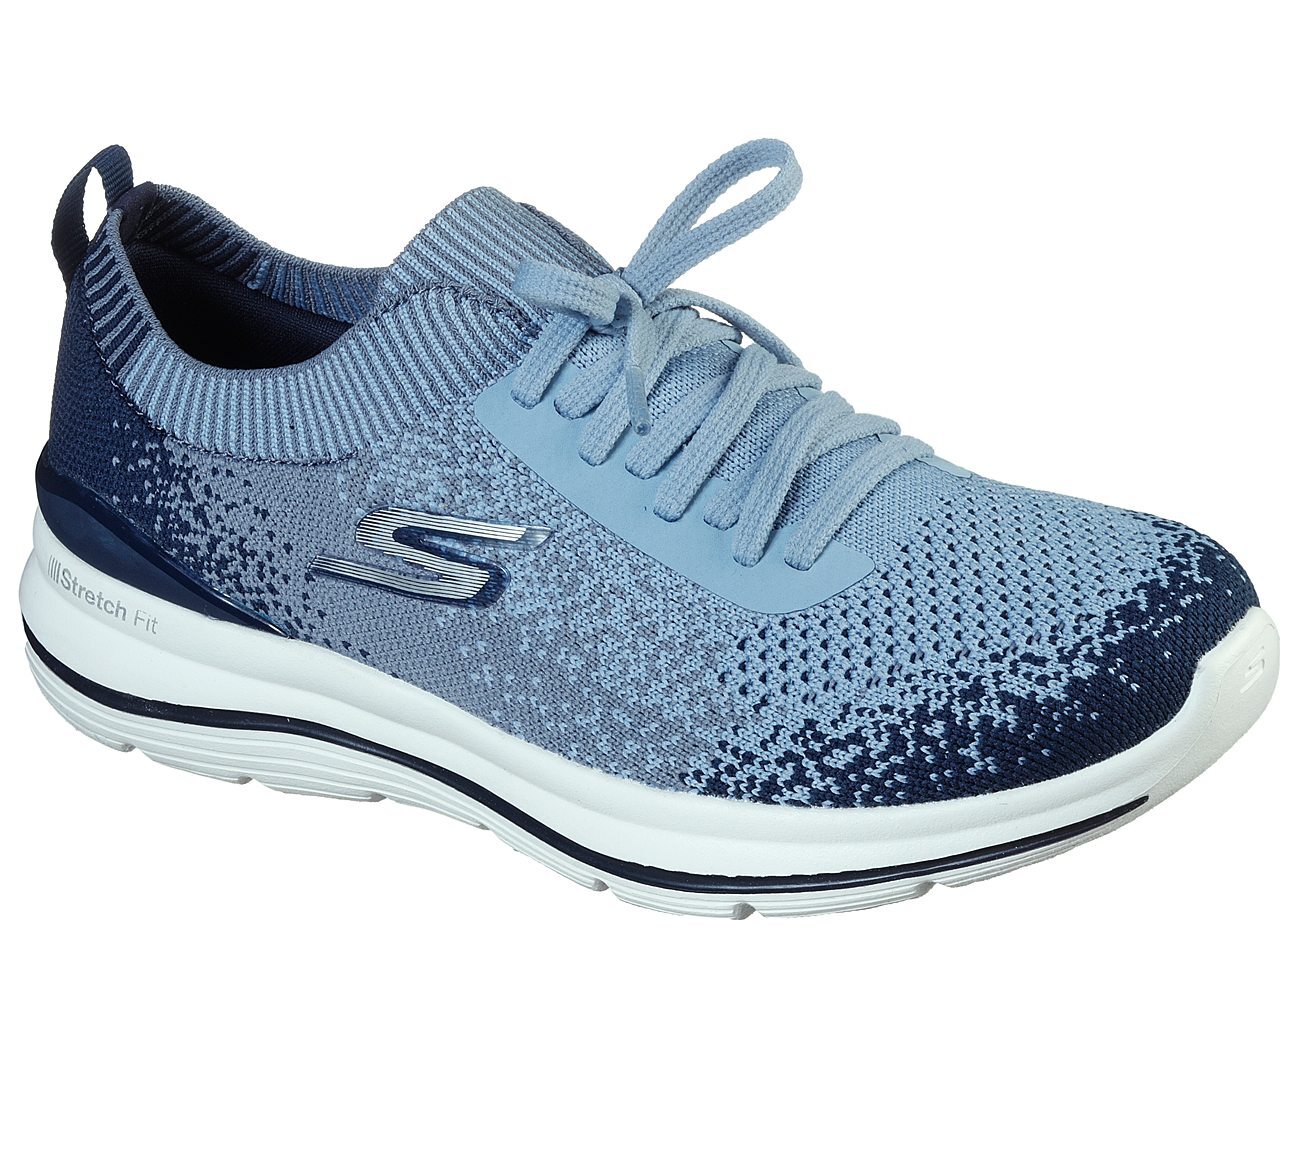 Skechers Navy/Blue Go Walk Stretch Fit Womens Lace Up Shoes - Style ID ...